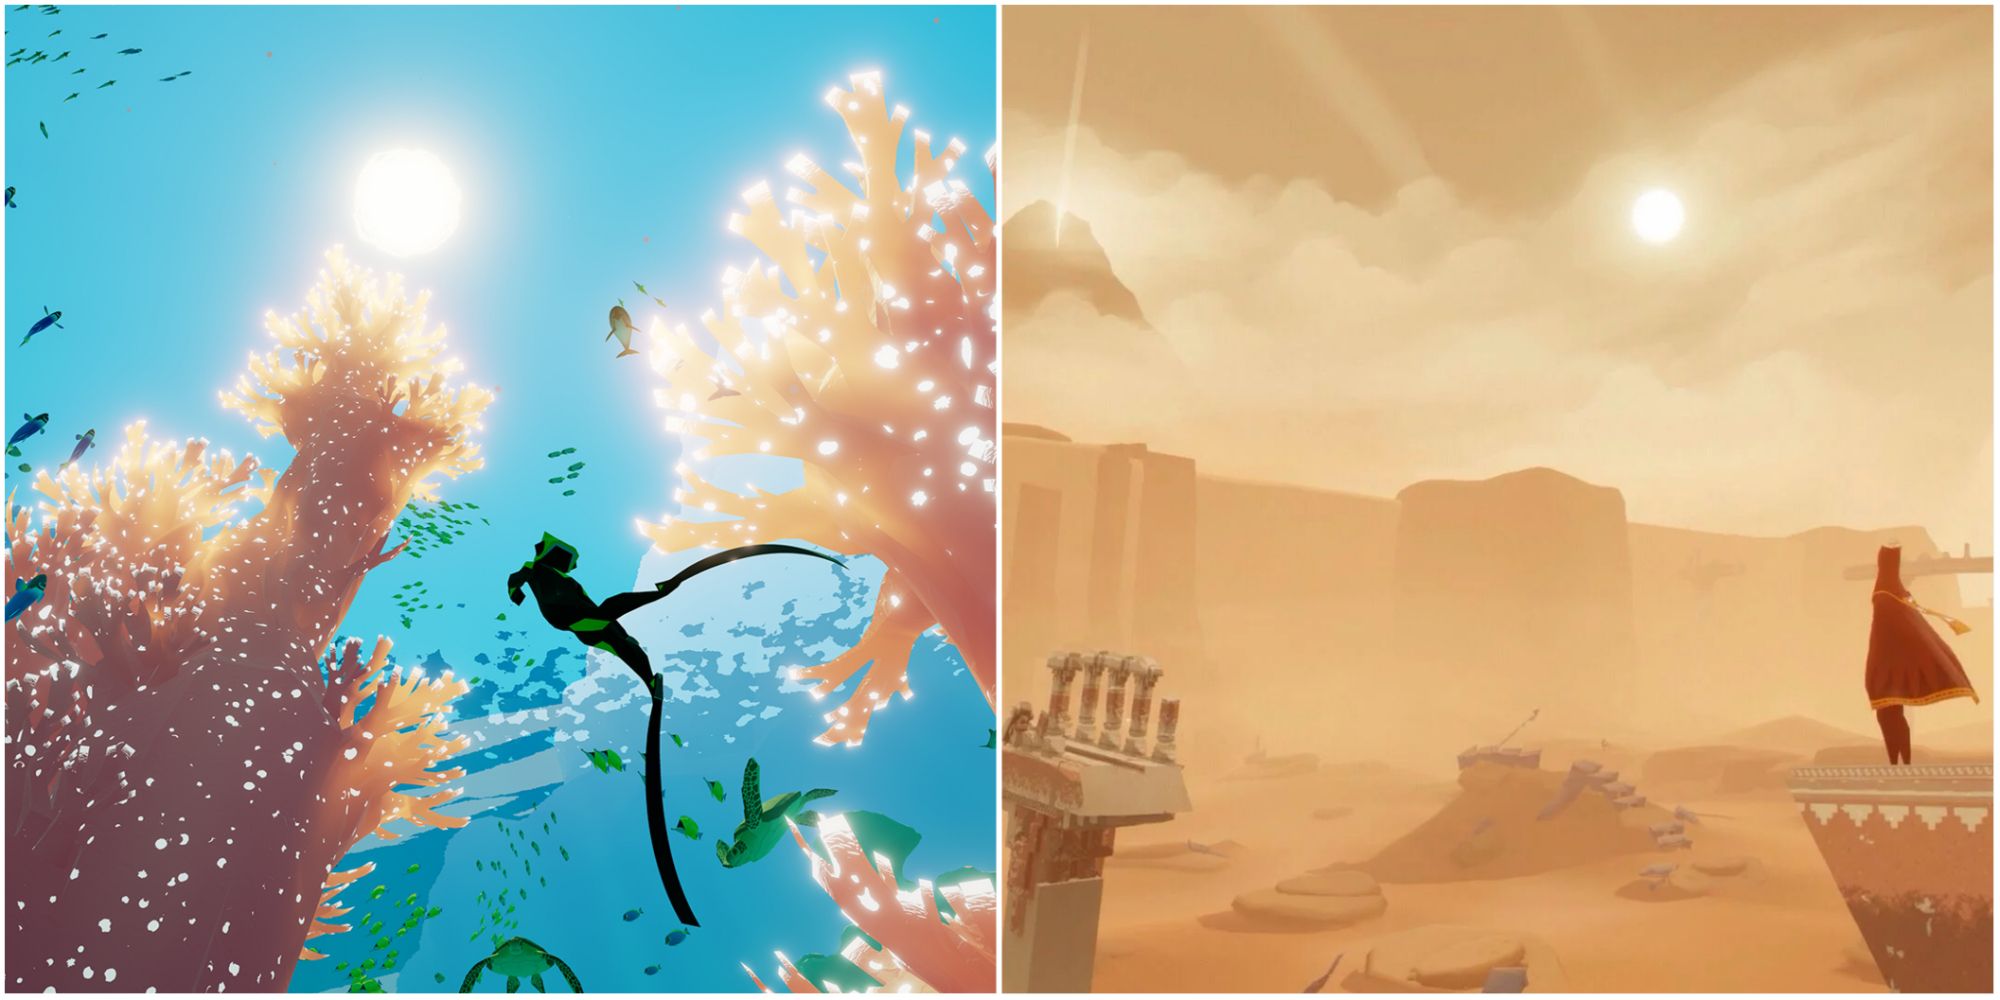 A split image of the Diver under the sea in Abzu and the Traveler looking out over the desert in Journey